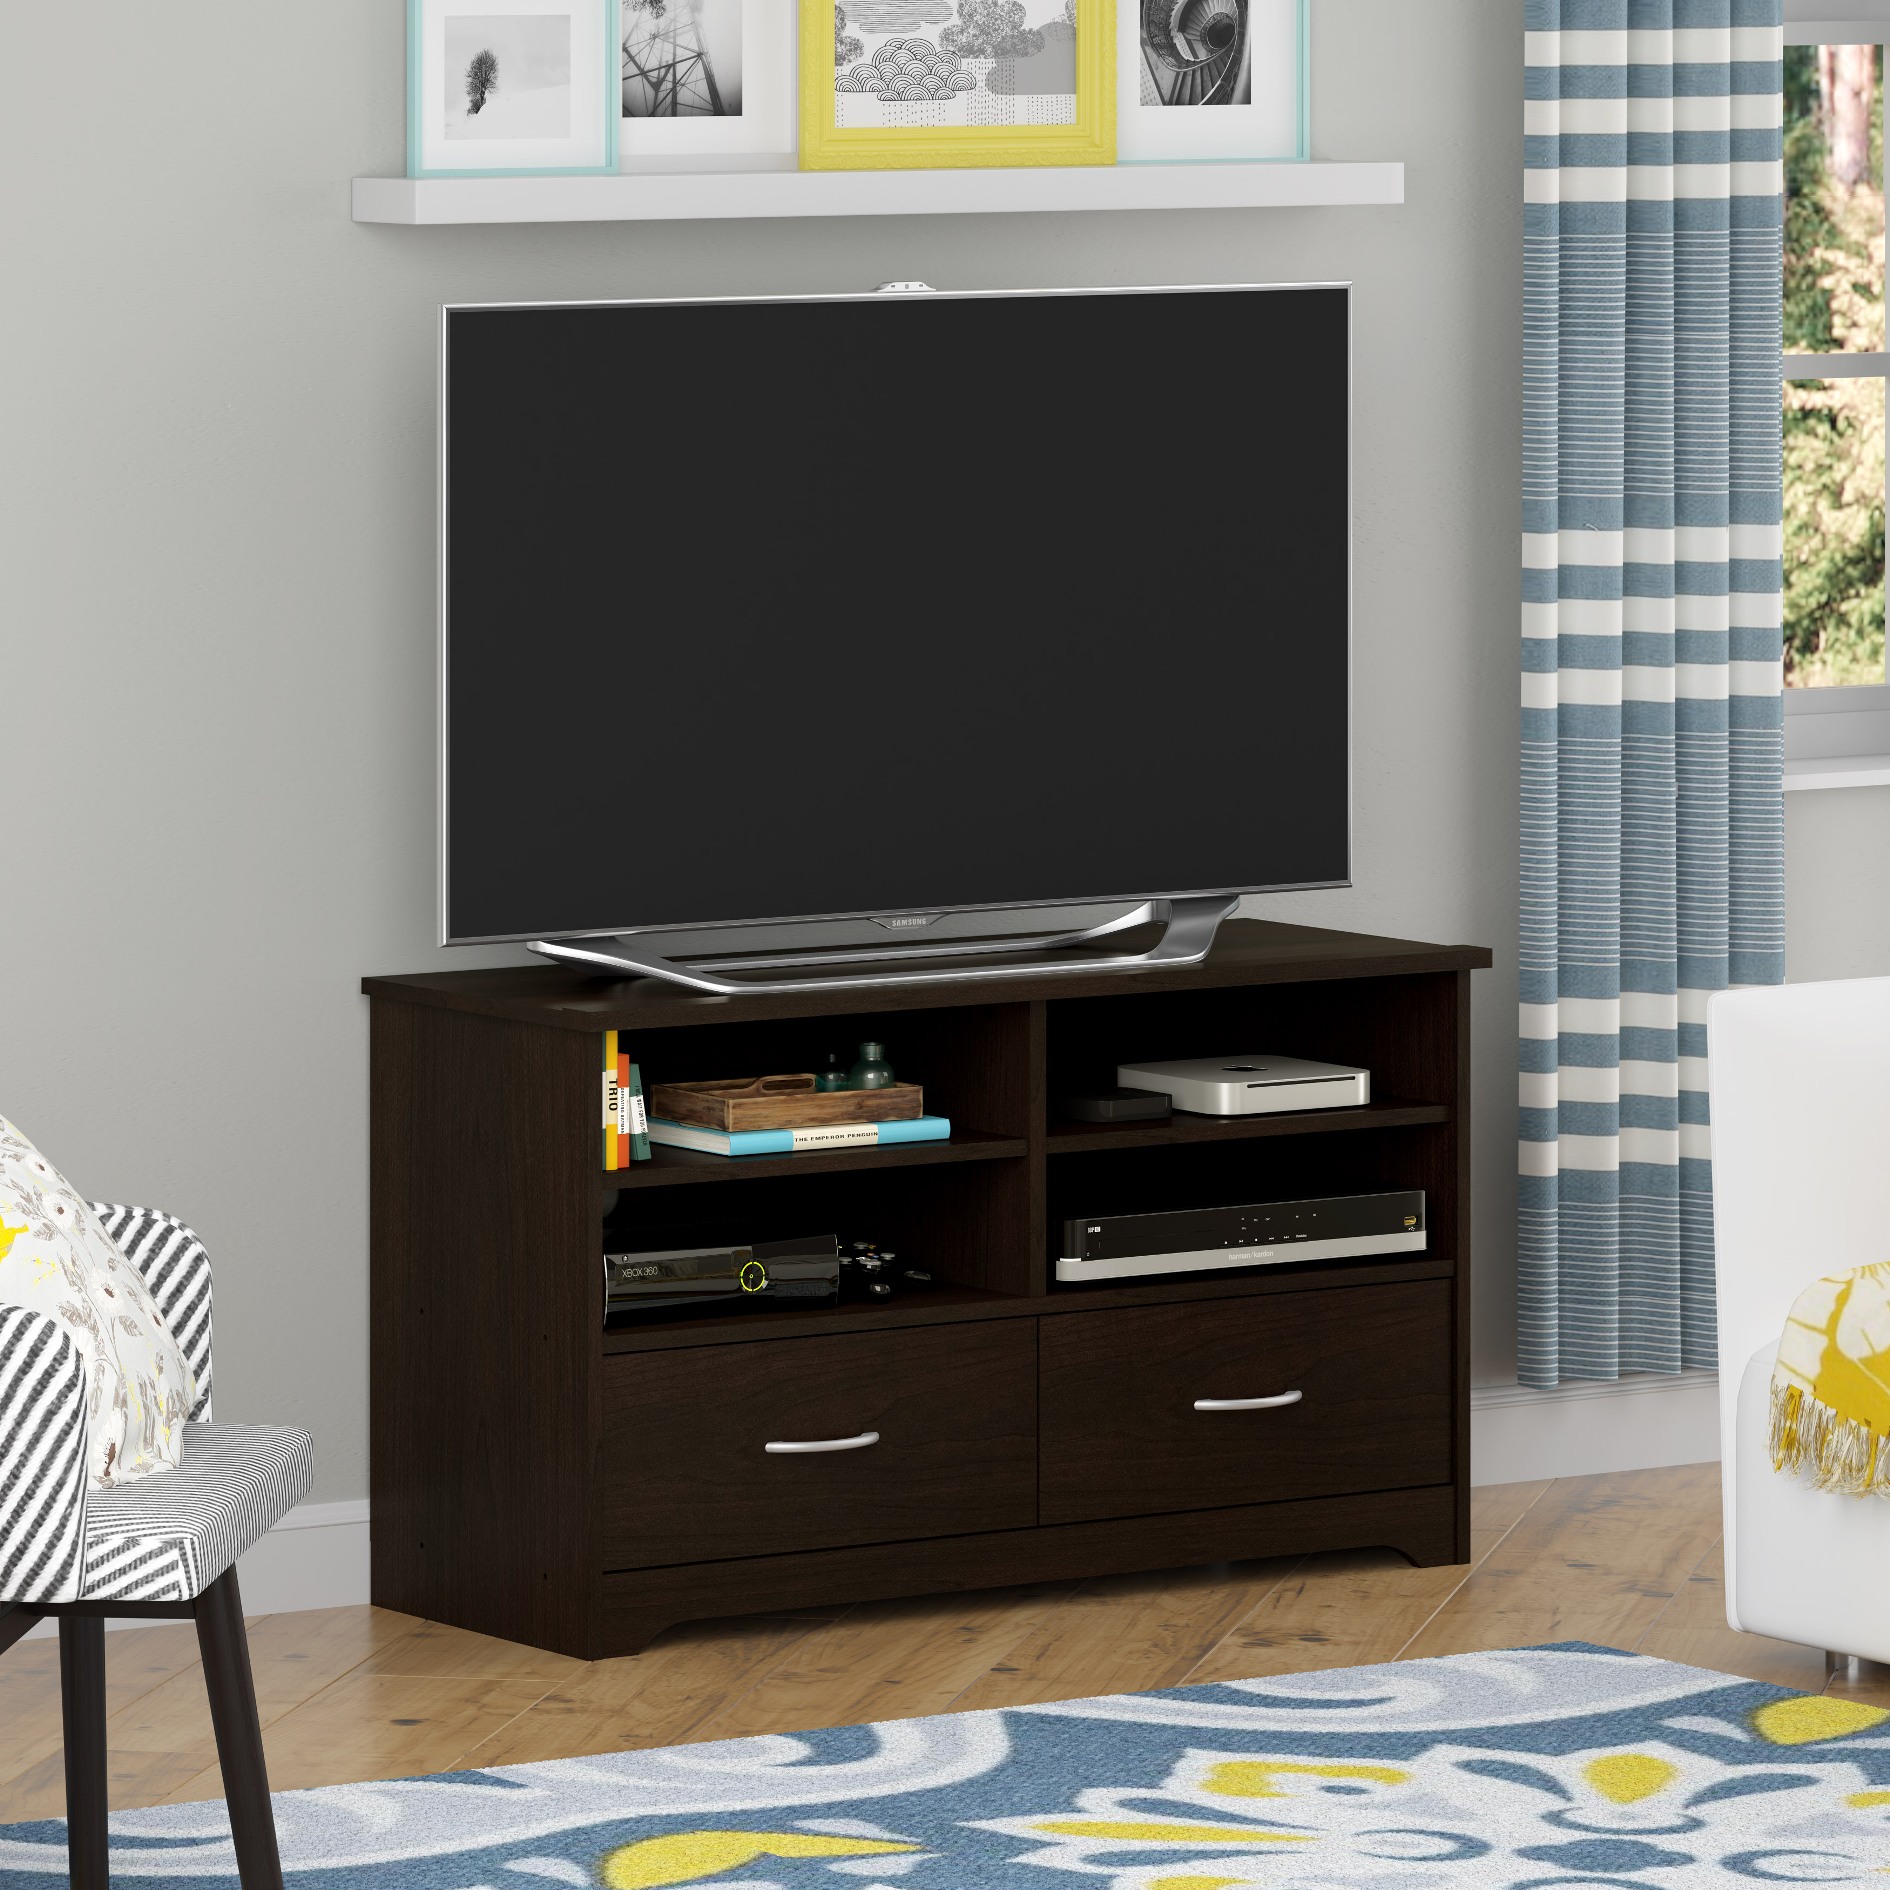 Good To Go TV Stand - Cherry